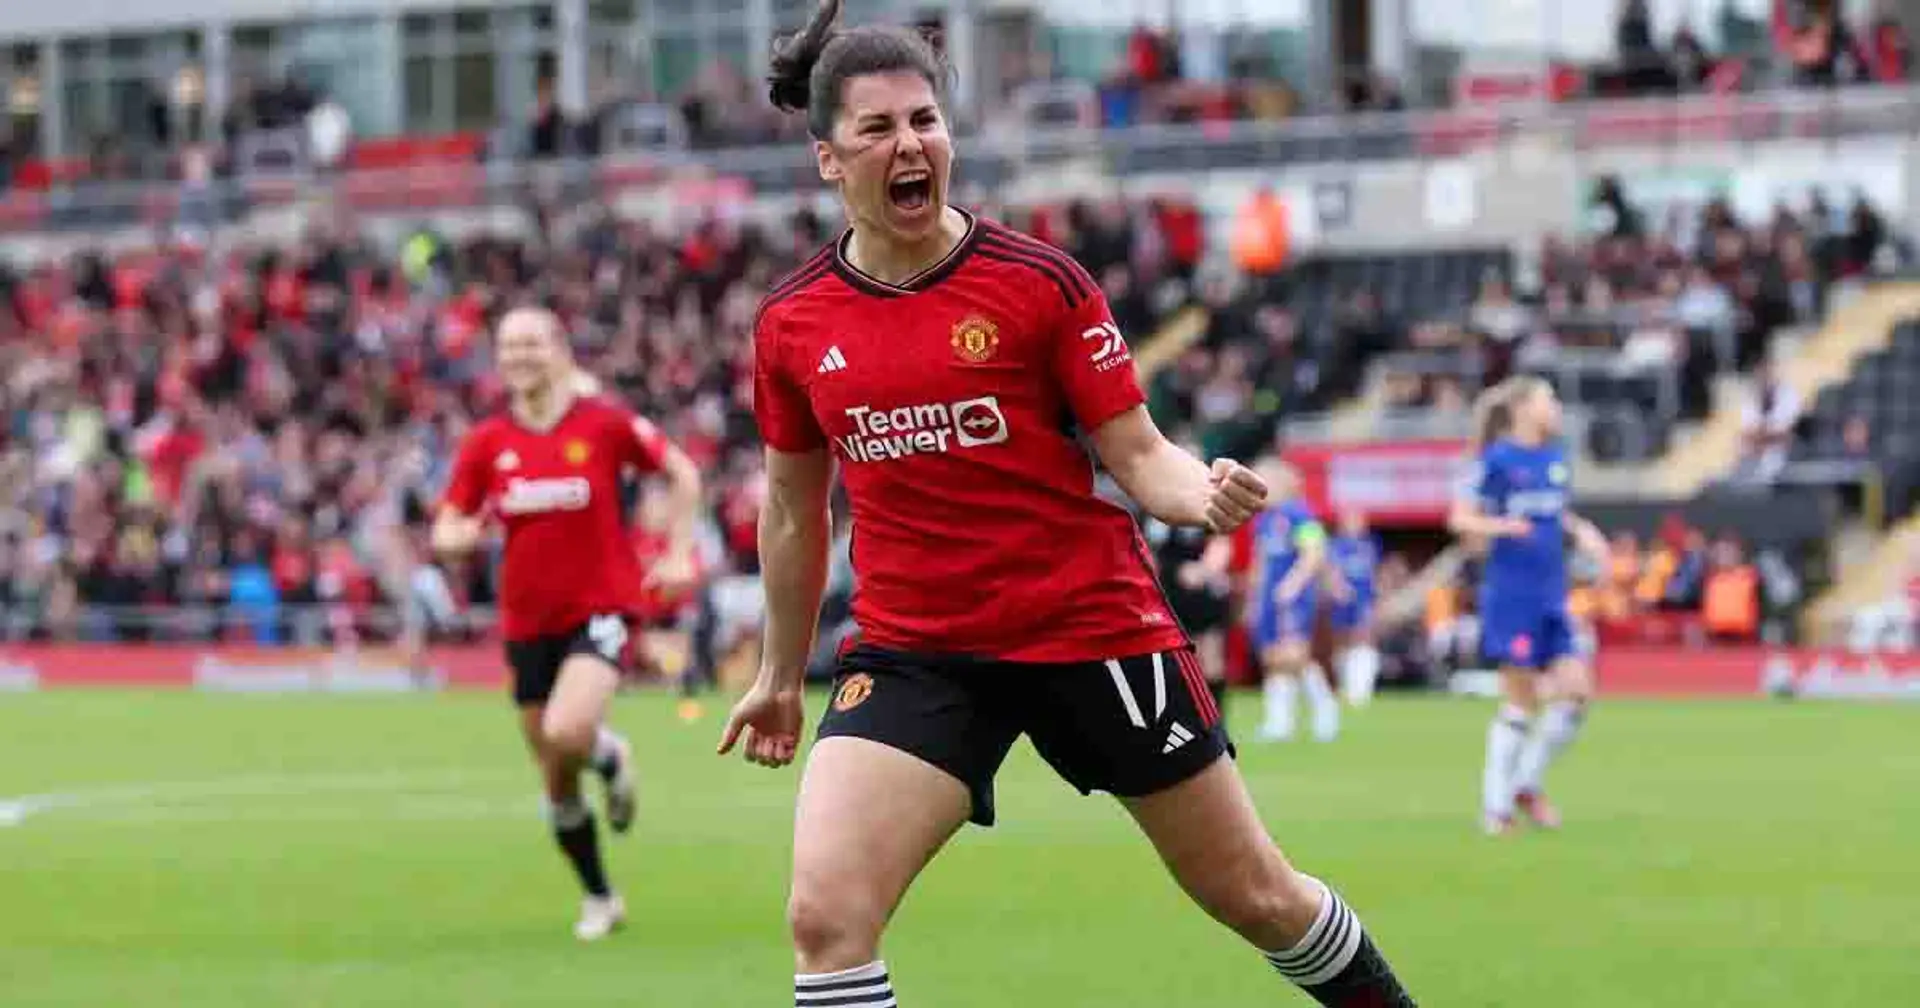 Man United women move into Women's FA Cup final with historic win over Chelsea